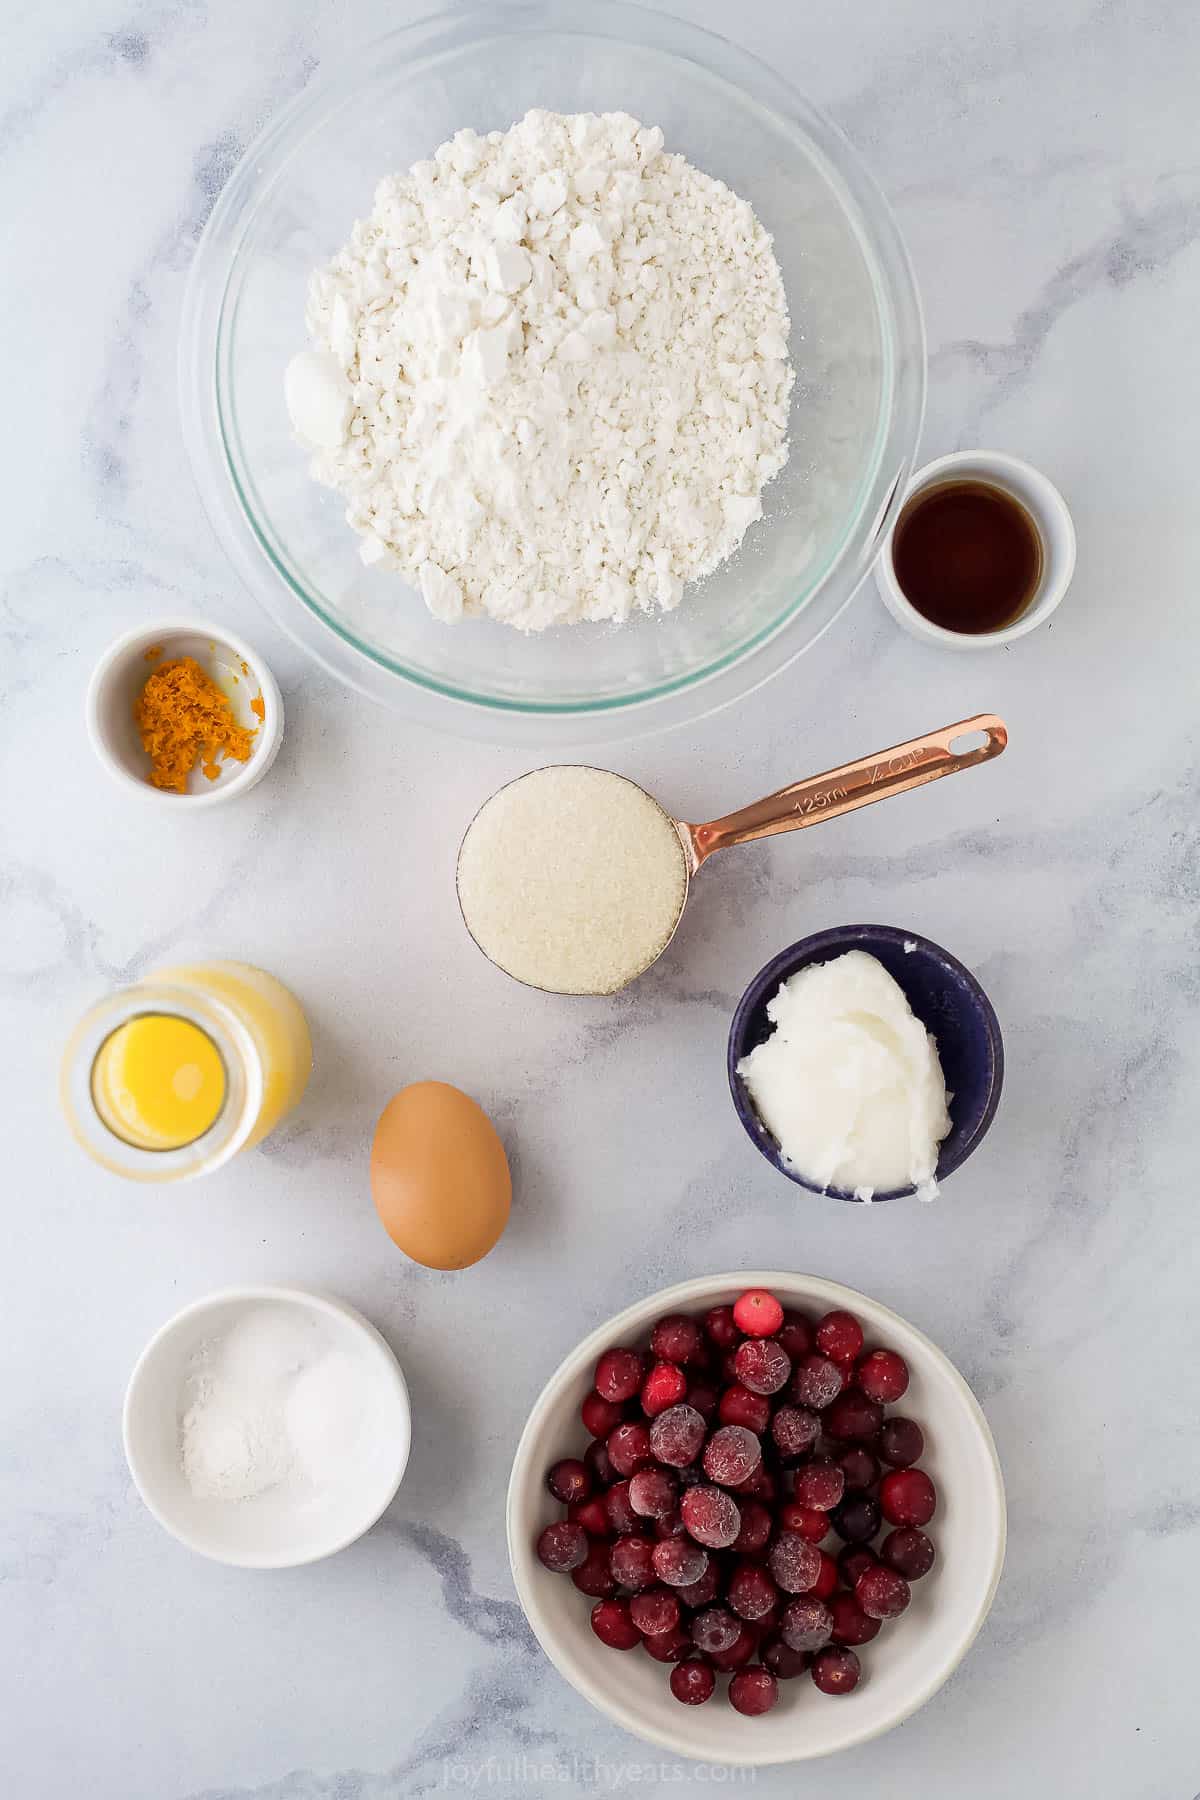 A bowl of gluten-free flour, an egg, coconut oil and the remaining muffin ingredients on a marble countertop